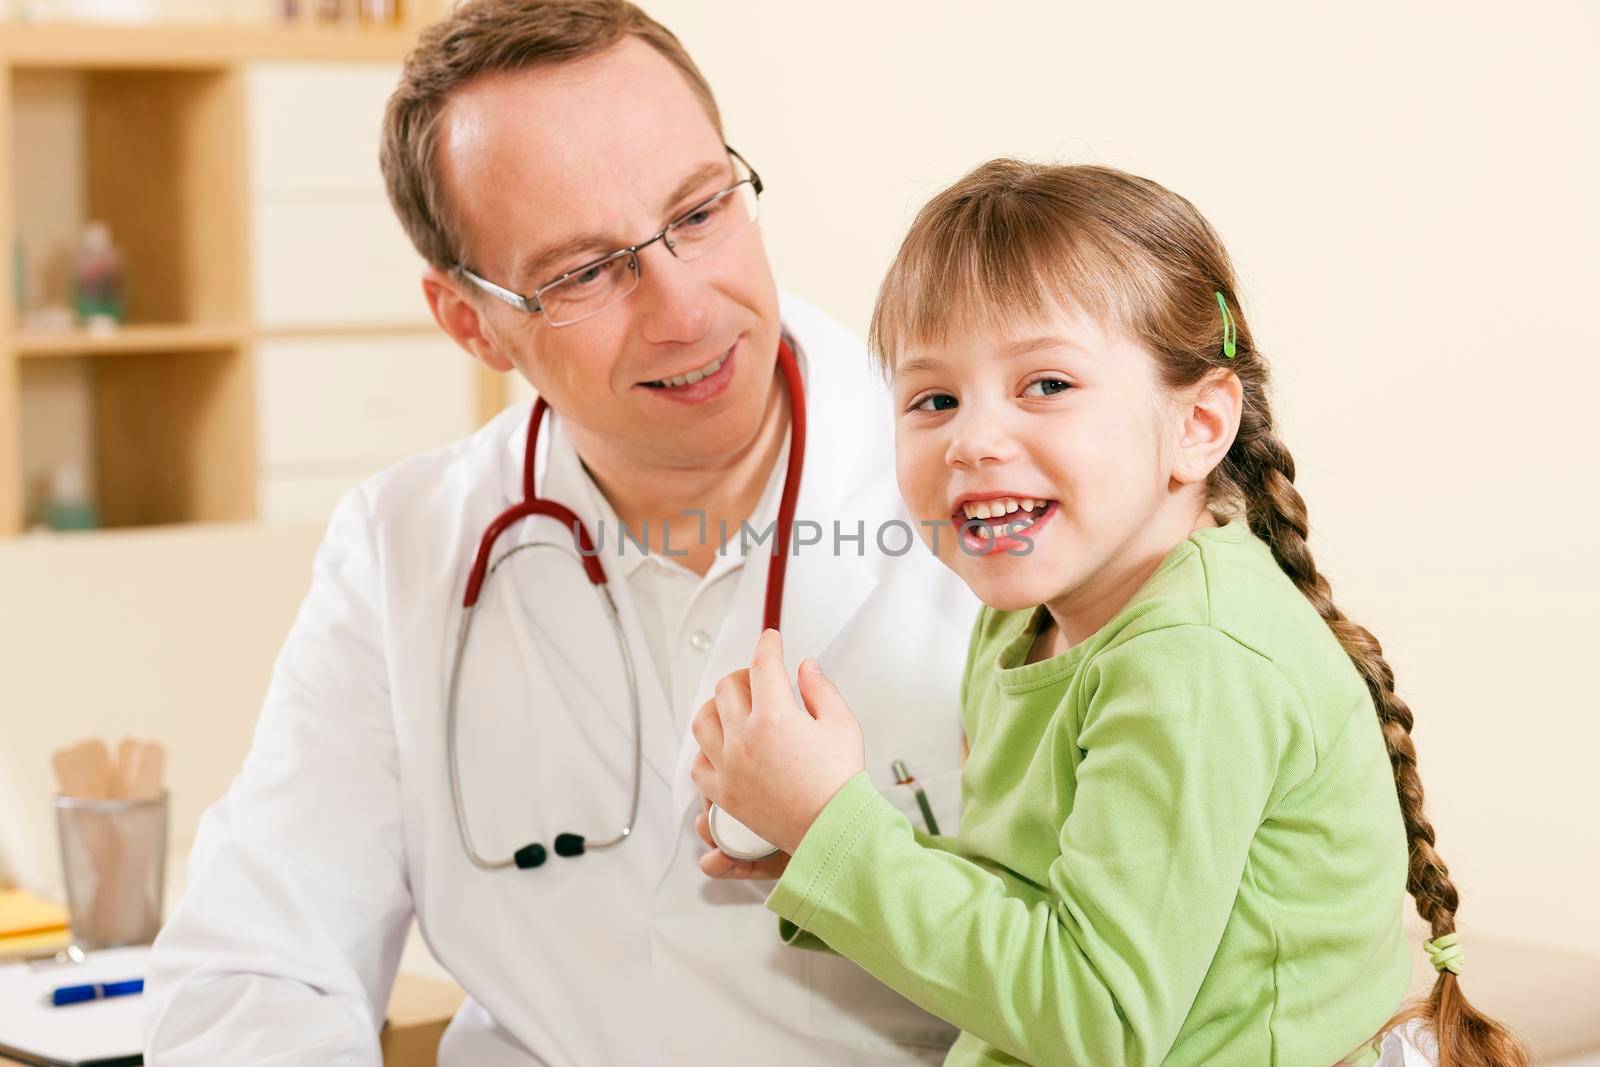 Pediatrician doctor with child patient  by Kzenon